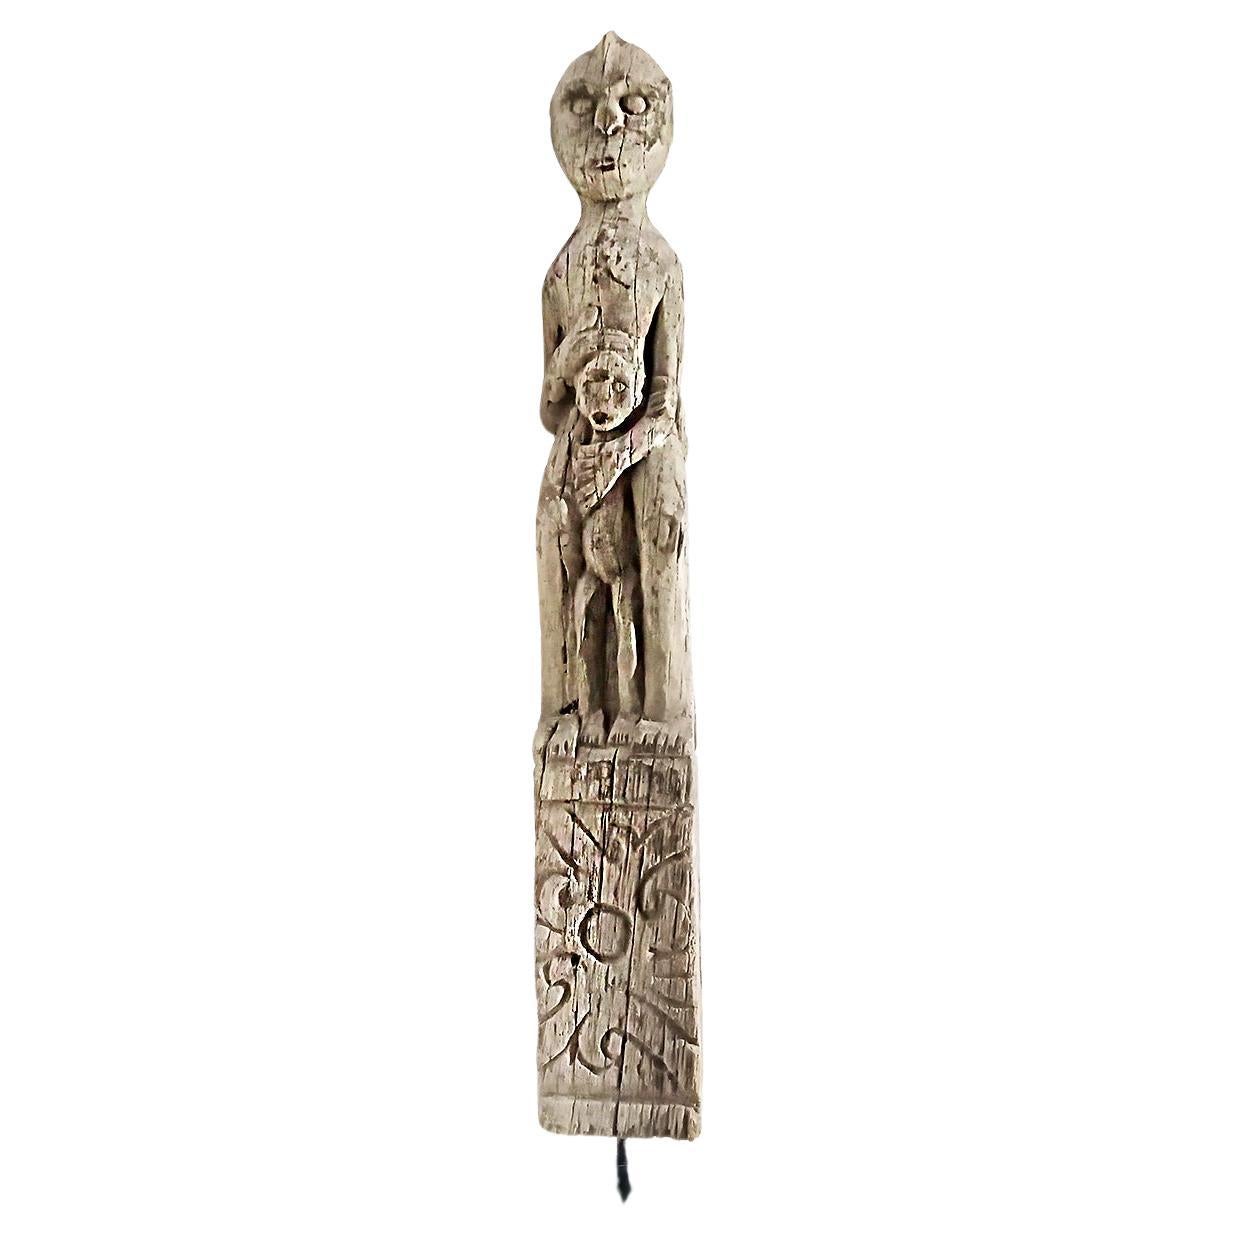 Dayak "Mother and Child" Ironwood Sculpture, Early 20th Century